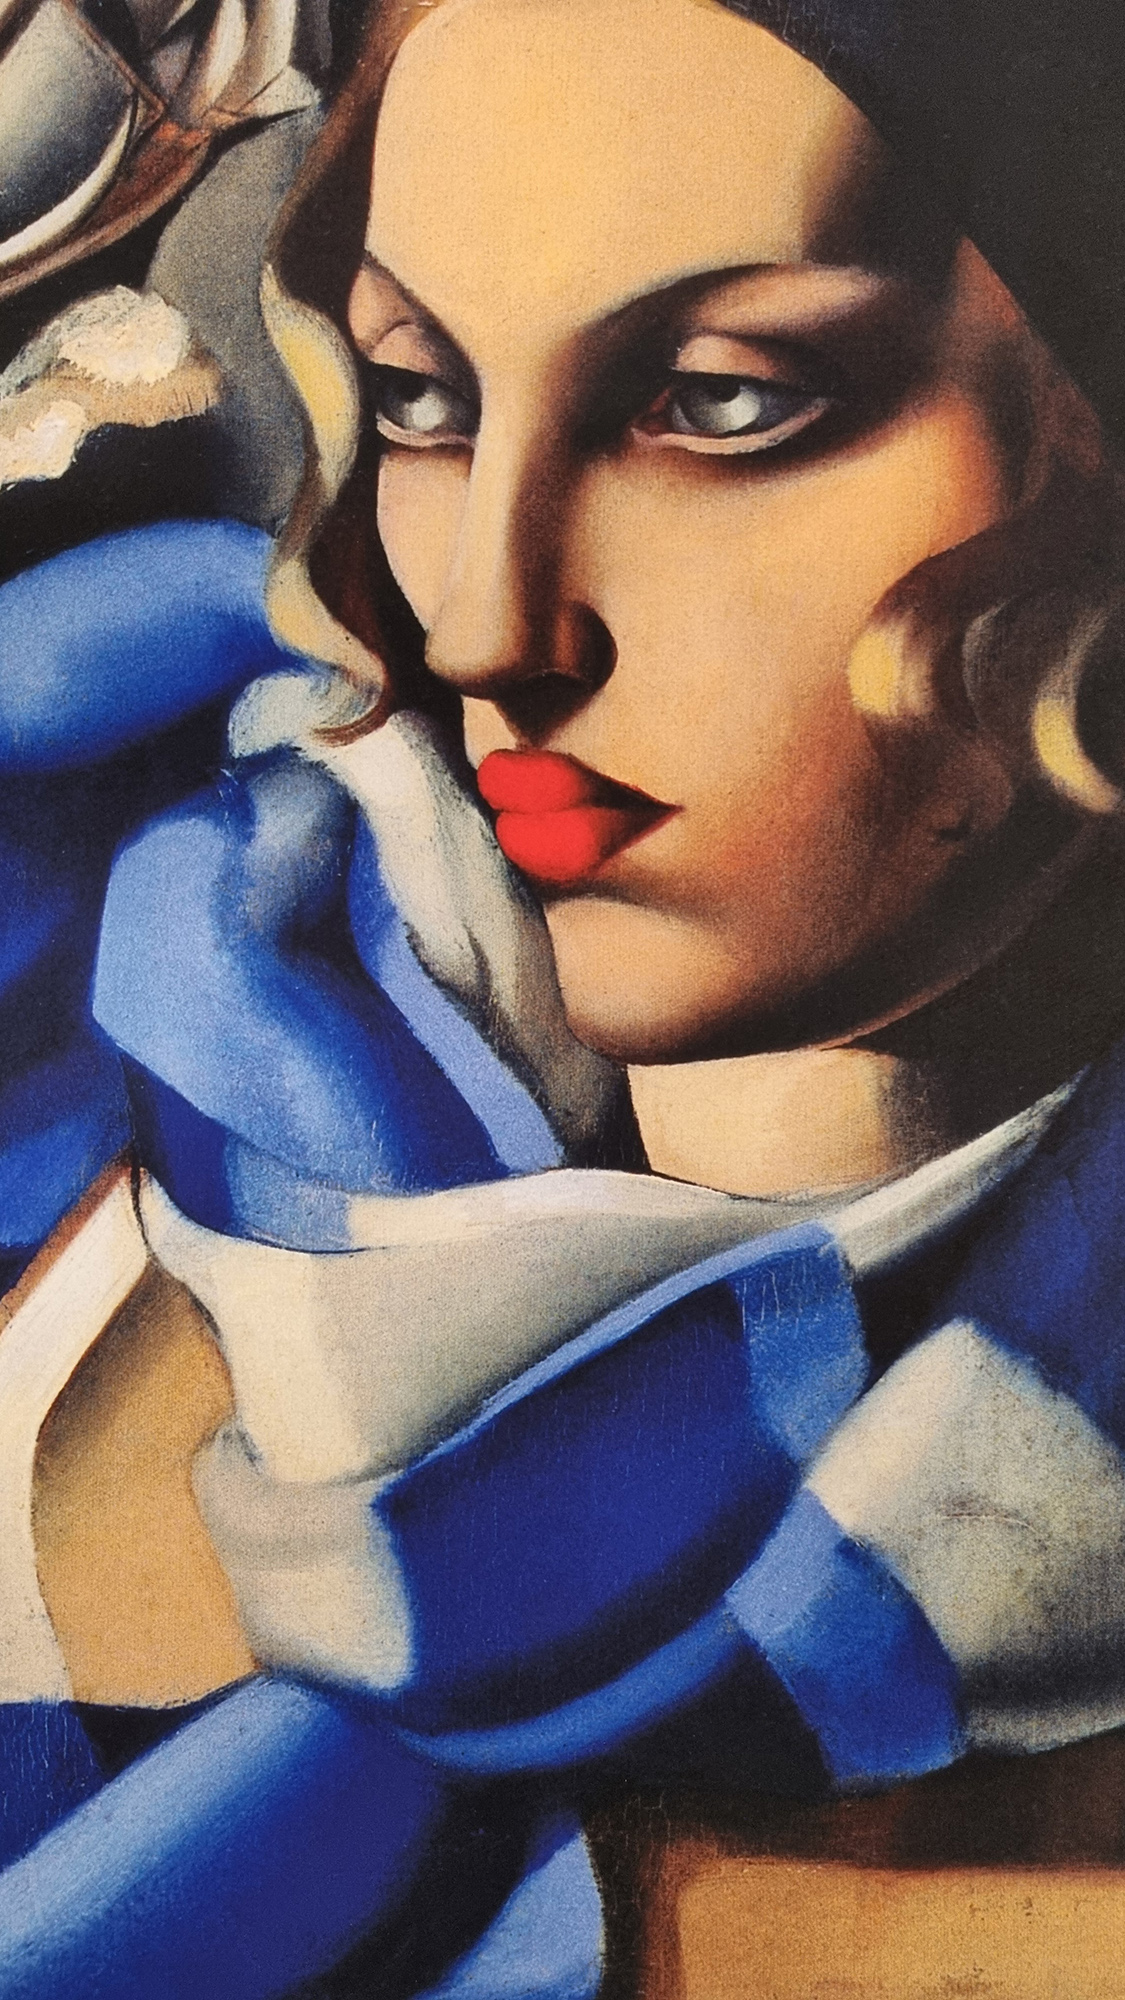 Tamara De Lempicka Limited Edition with Lempicka Estate (New York) Authenticated Certificate. - Image 5 of 5